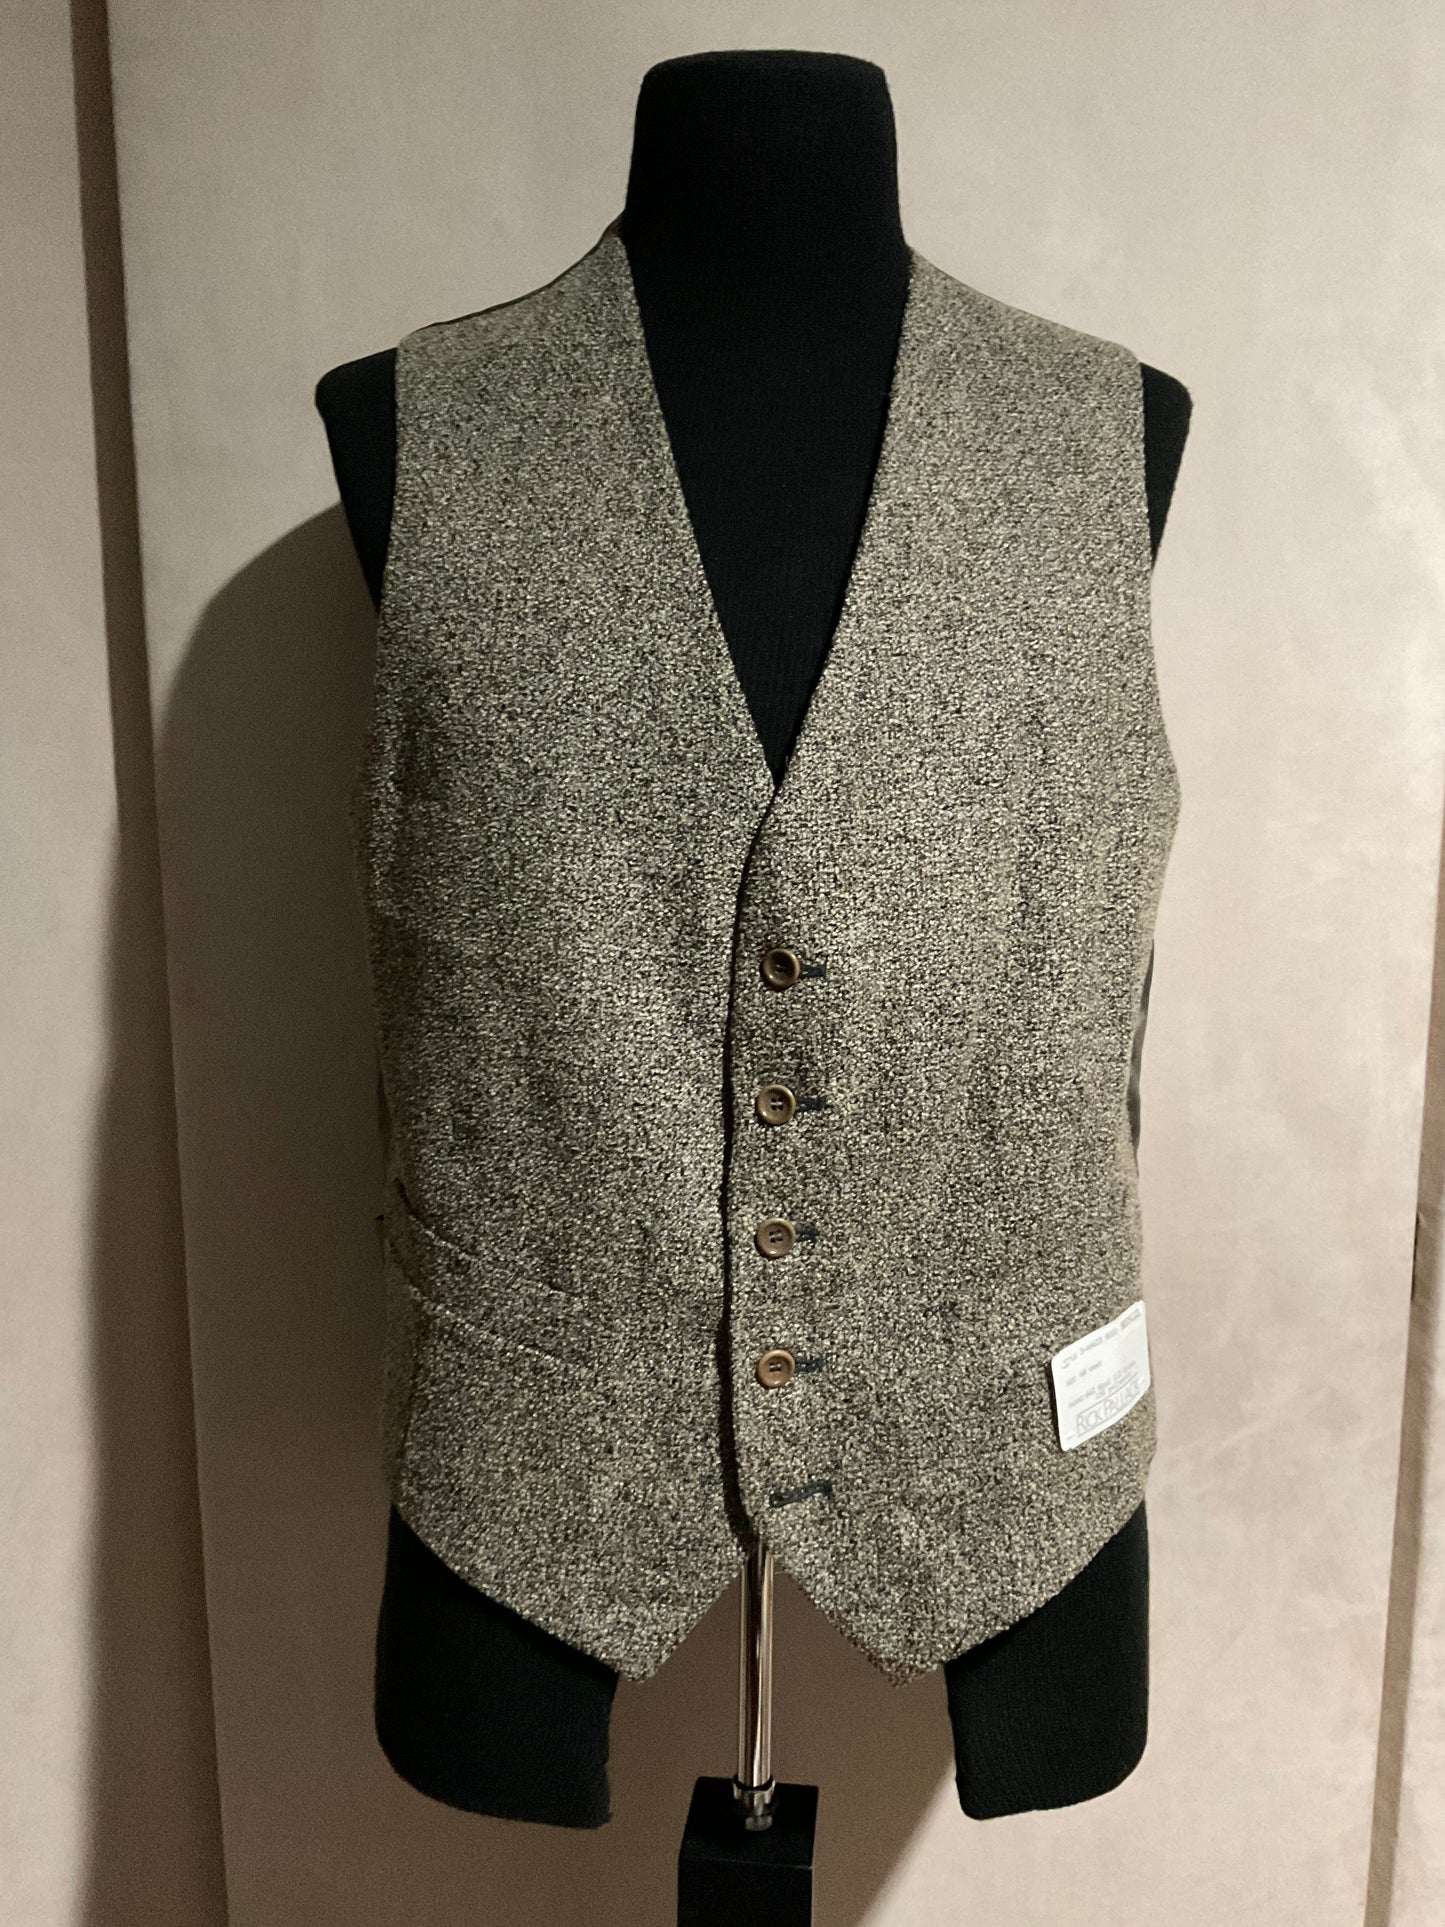 R P VEST / BLACK & TAUPE BOUCLÉ / 40 / NEW / MADE IN ITALY